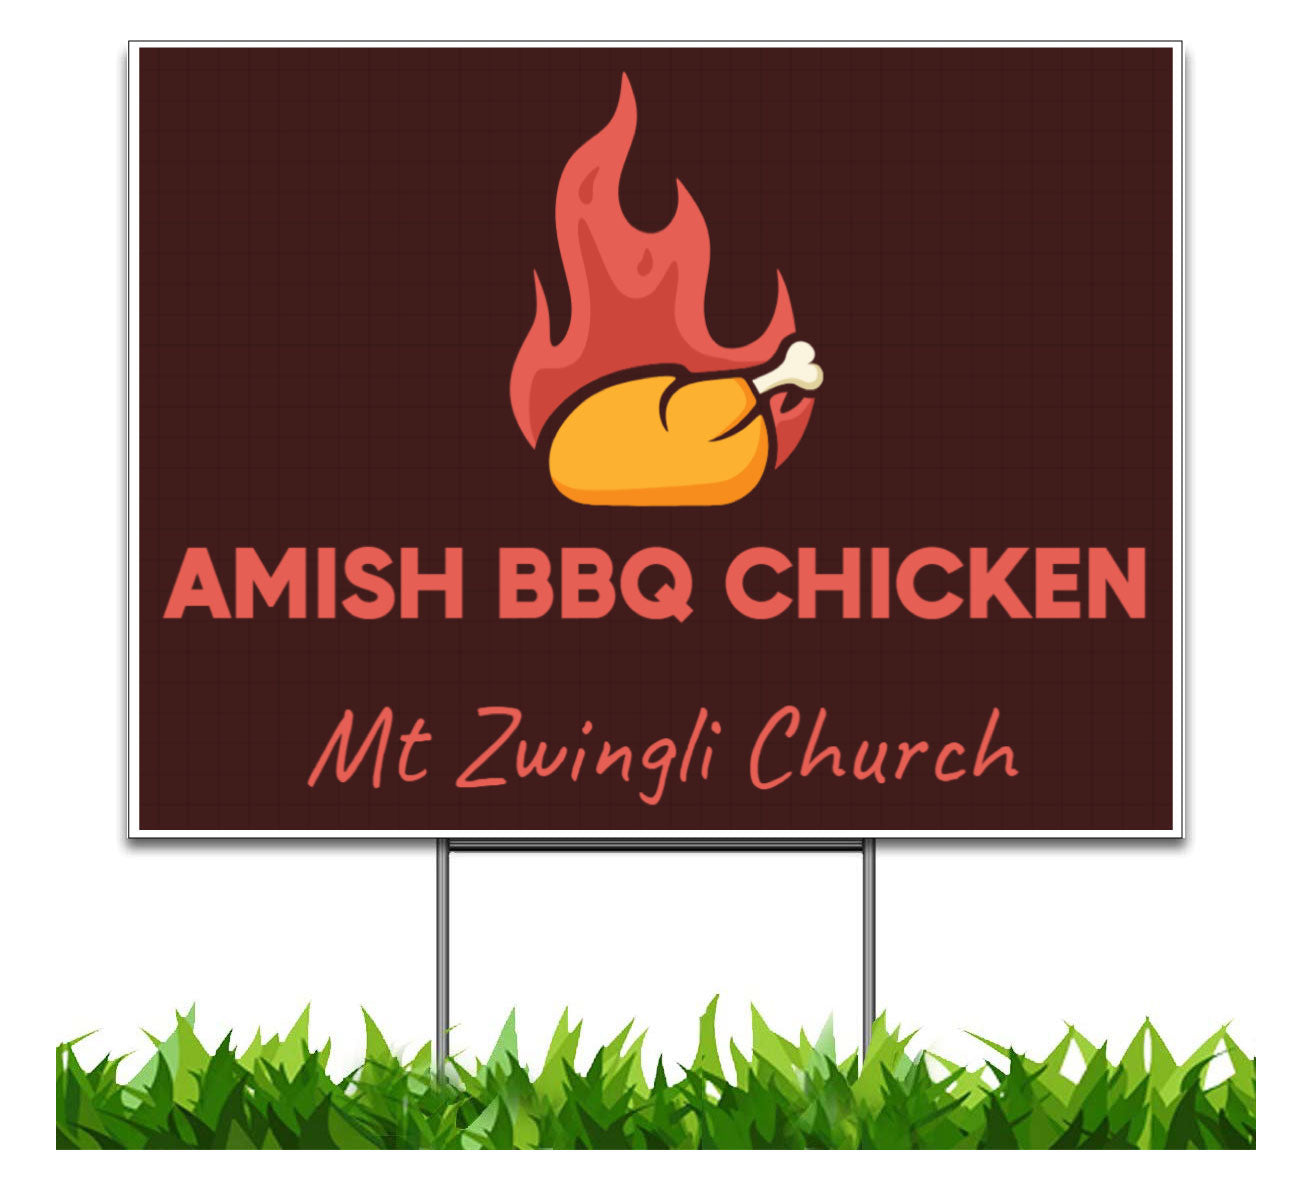 Amish BBQ Chicken Yard Sign, 24x18 inch Double Sided, H-Stake Included